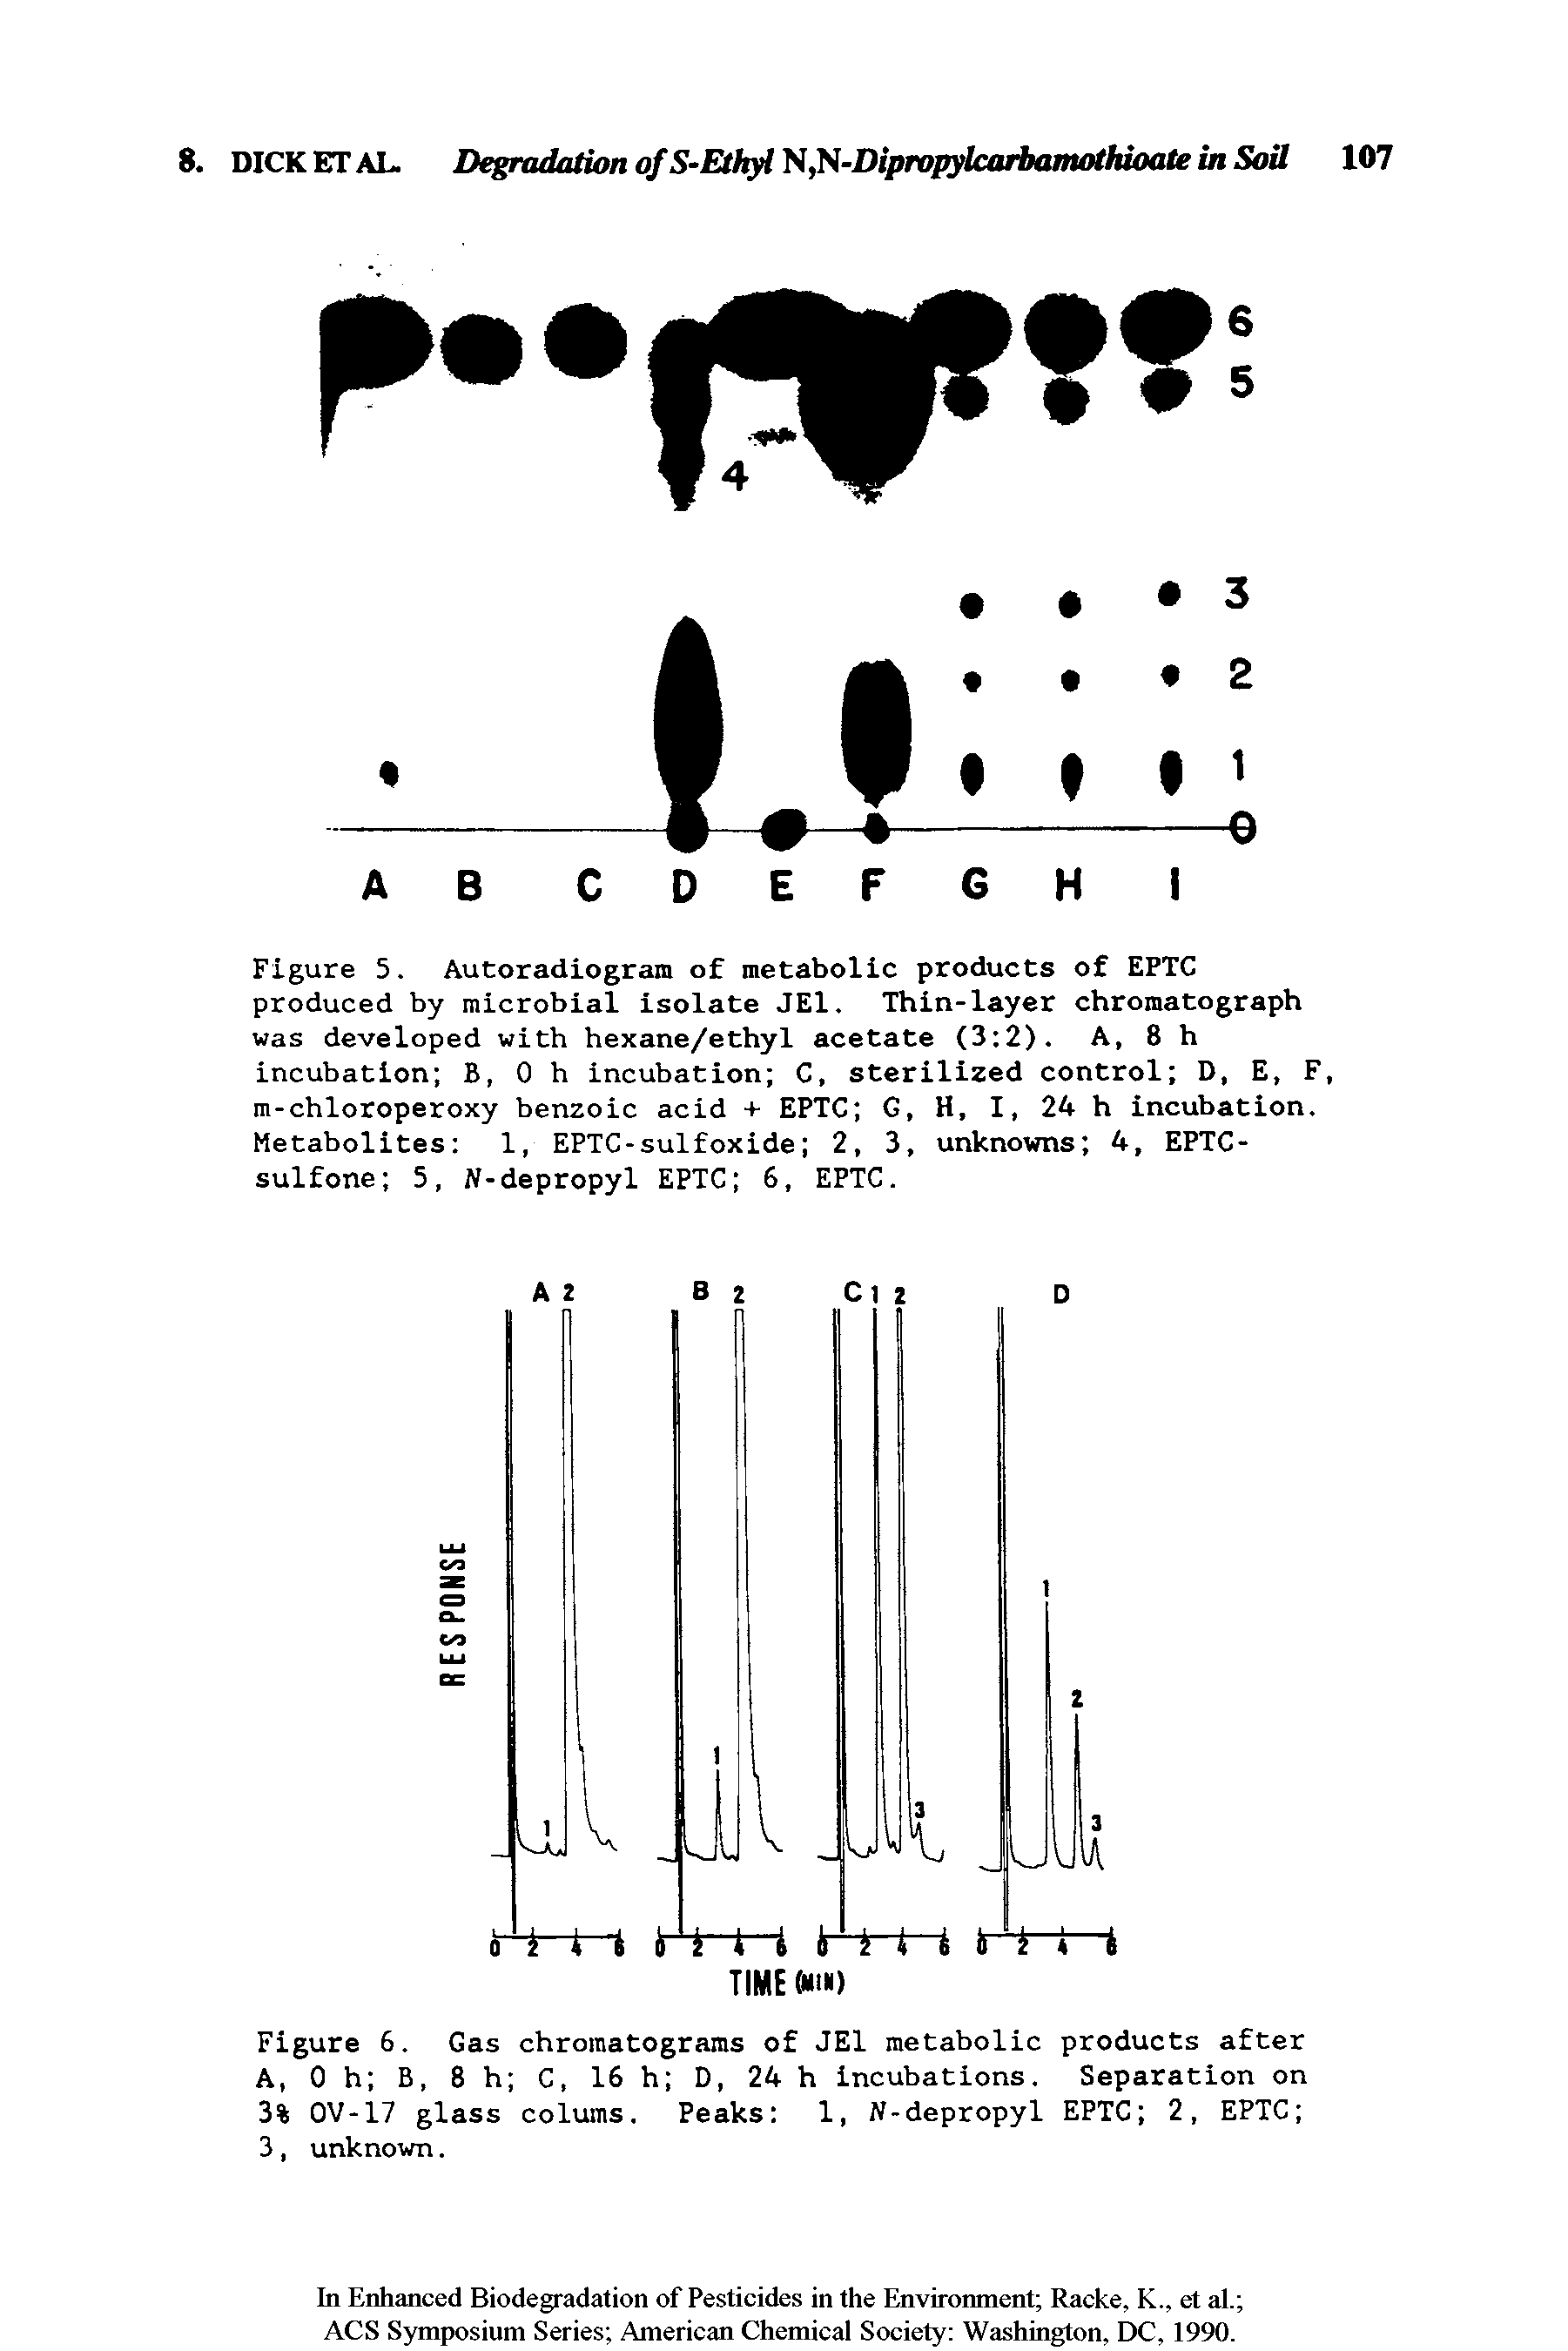 Figure 5. Autoradiogram of metabolic products of EPTC produced by microbial isolate JE1. Thin-layer chromatograph was developed with hexane/ethyl acetate (3 2). A, 8 h incubation B, Oh incubation C, sterilized control D, E, F, m-chloroperoxy benzoic acid + EPTC G, H, I, 24 h incubation. Metabolites 1, EPTC-sulfoxide 2, 3, unknowns 4, EPTC-sulfone 5, N-depropyl EPTC 6, EPTC.